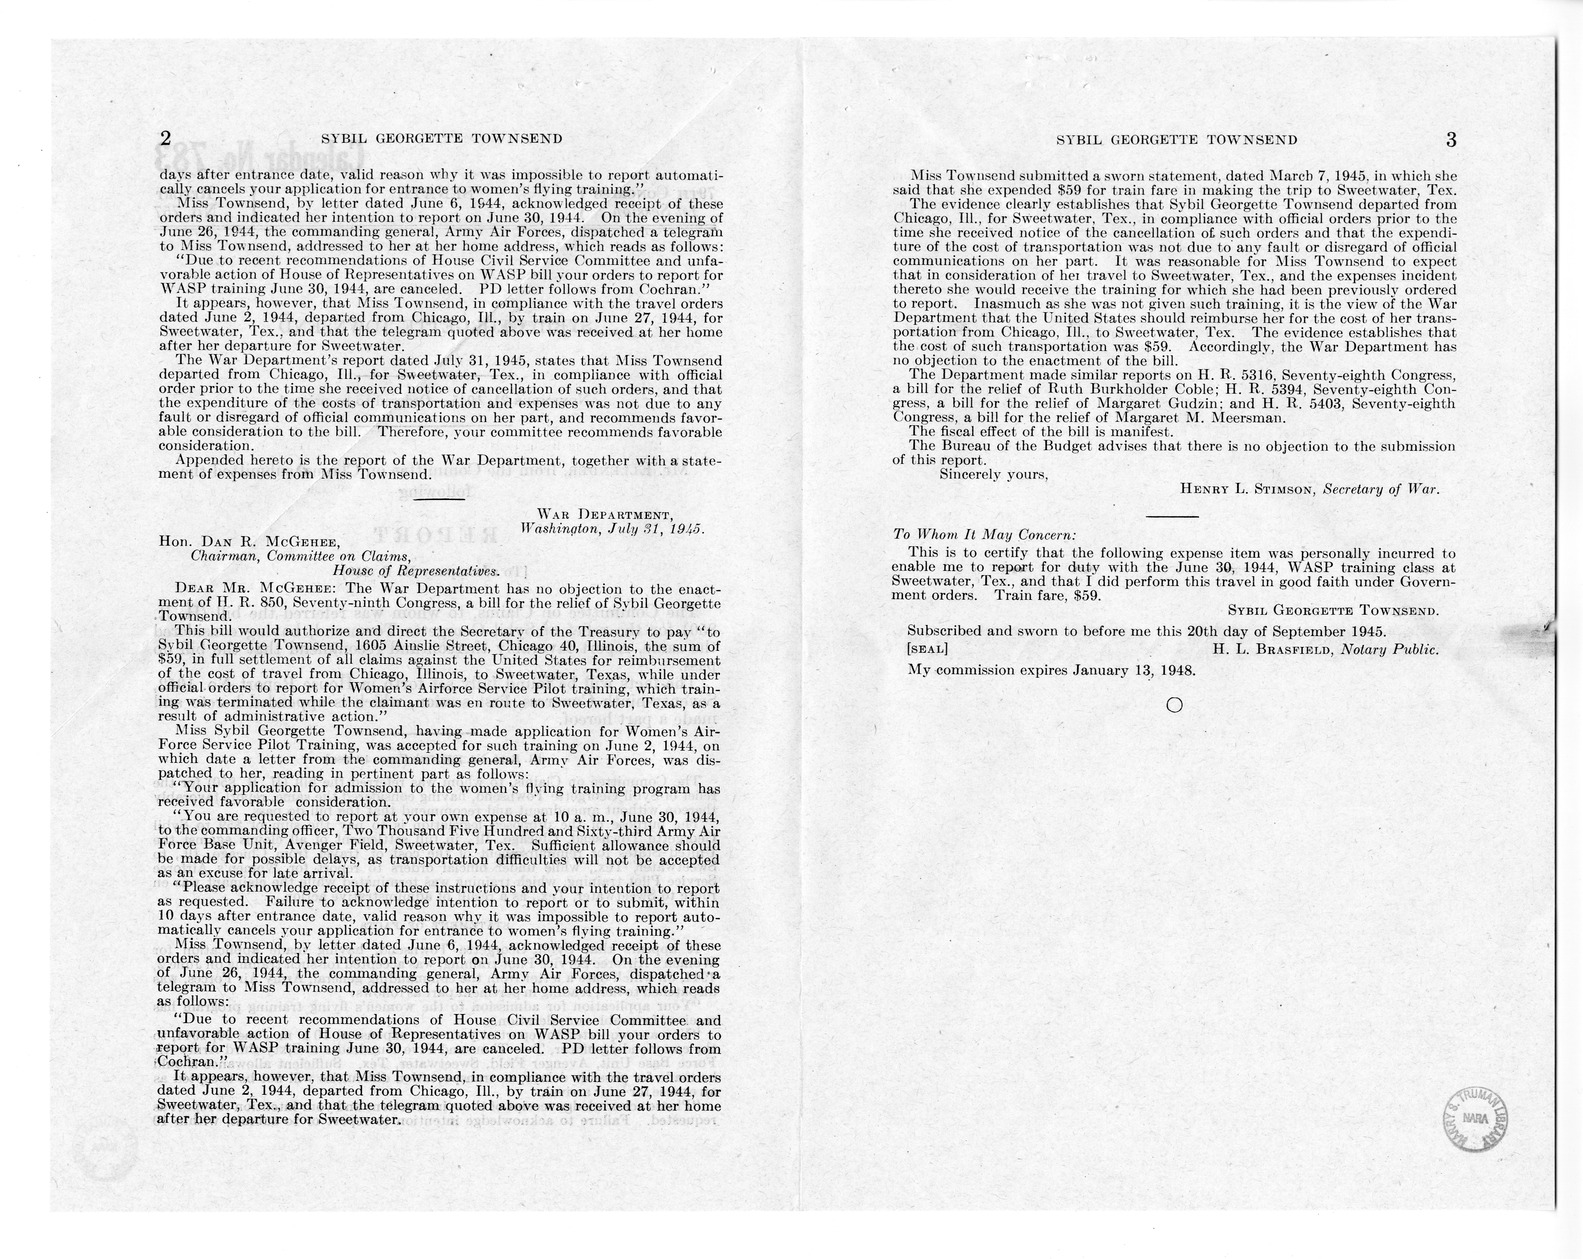 Memorandum from Frederick J. Bailey to M. C. Latta, H.R. 850, For the Relief of Sybil Georgette Townsend, with Attachments